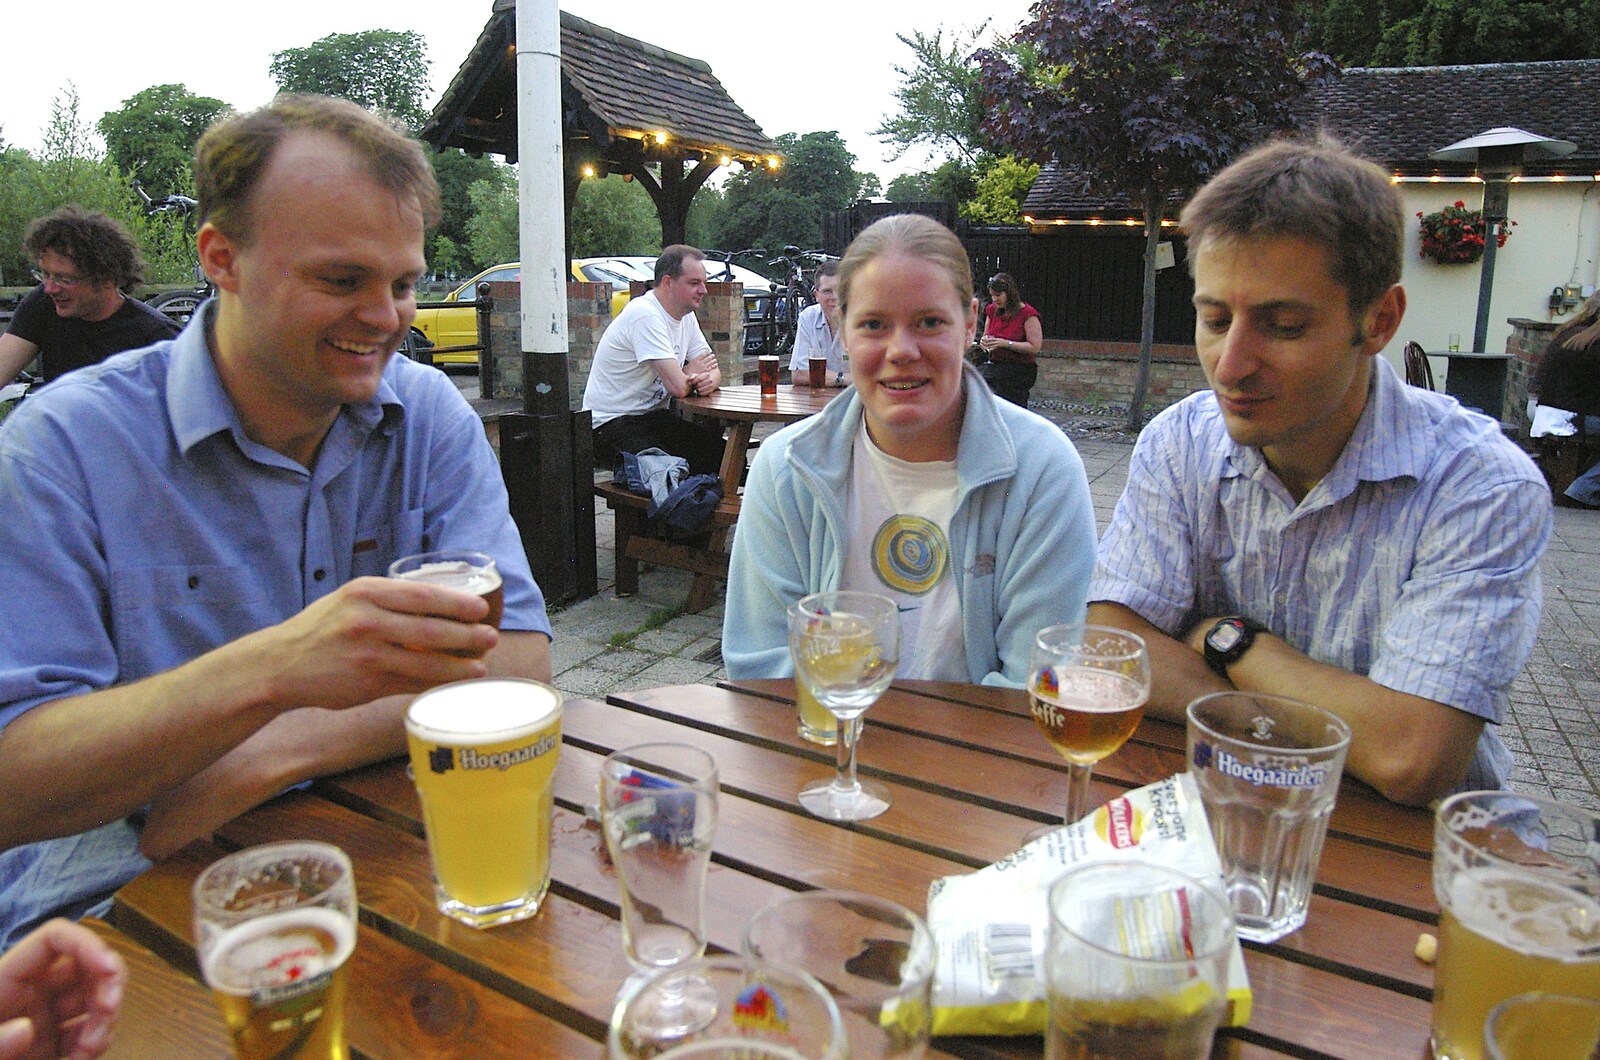 Nick, Clare and Ben from Ben Leaves "The Lab", Fort St. George, Cambridge - 16th June 2006